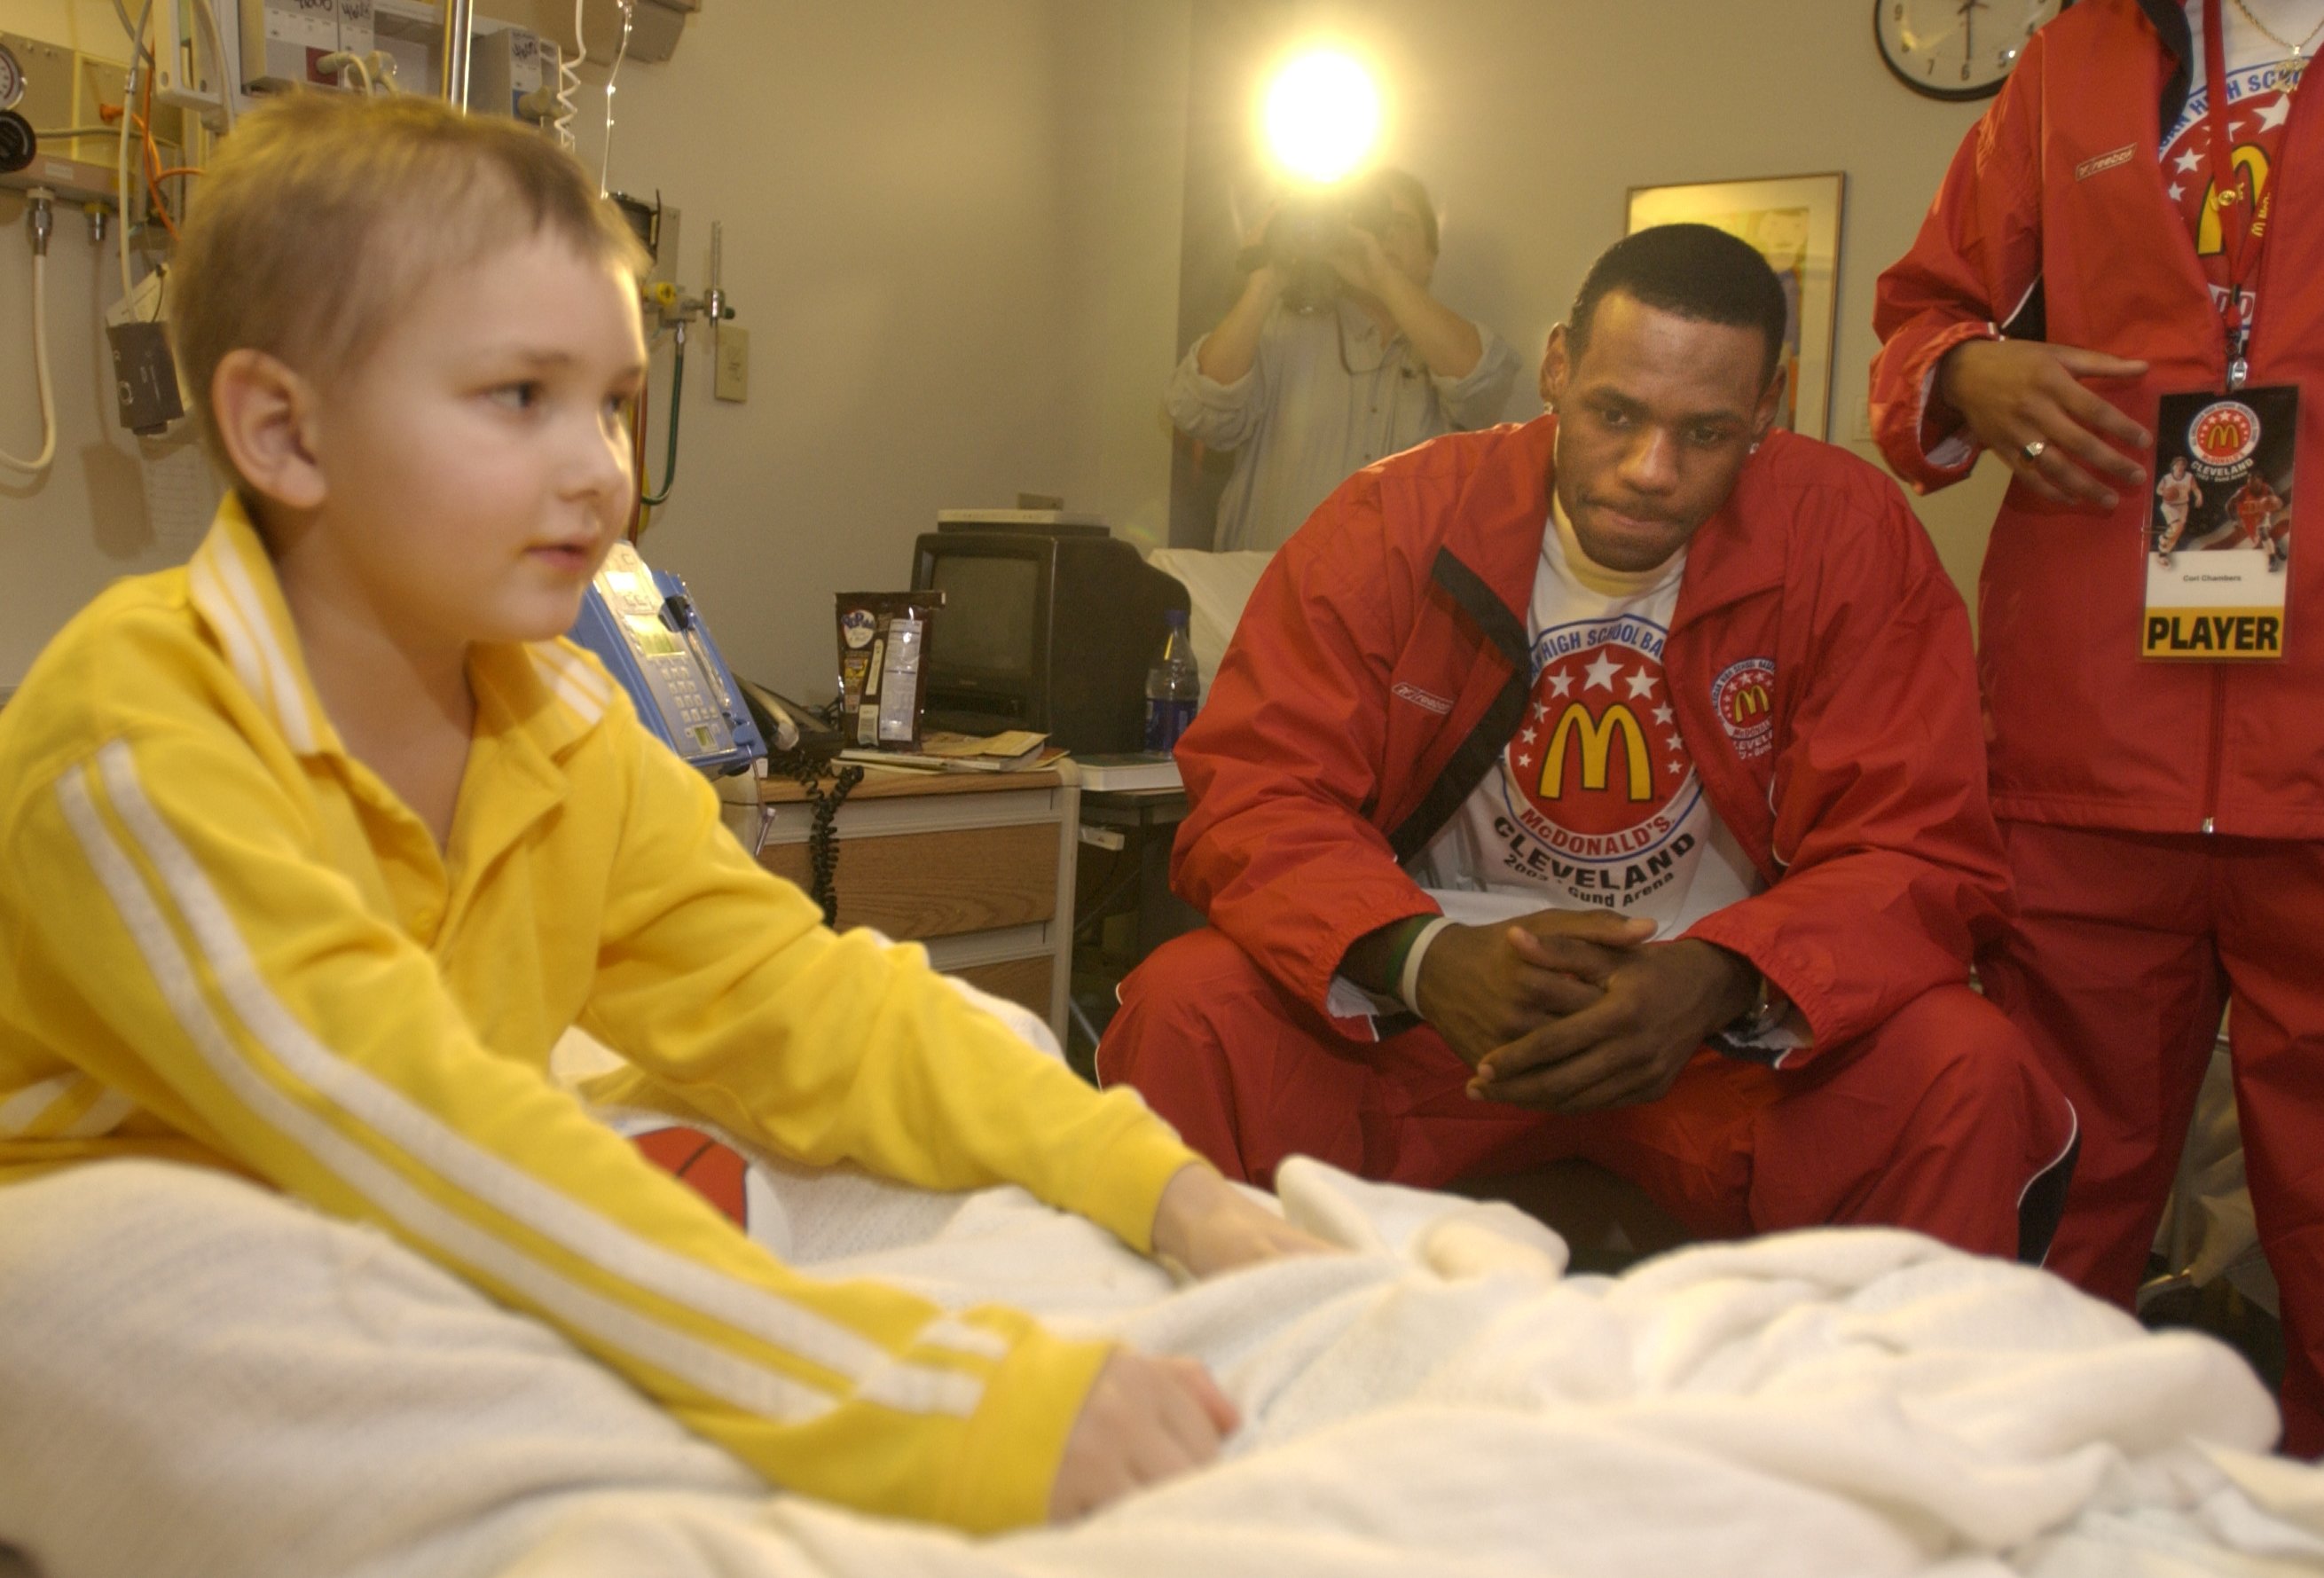 Tyler Heckman, 7, of Copley Twp. in Summit County, got a visit from a group of players that included local standout LeBron James as groups of players toured Akron Children's Hospital Sunday afternoon.     SUNDAY MARCH 23,2003 (BILL KENNEDY/PLAIN DEALER)